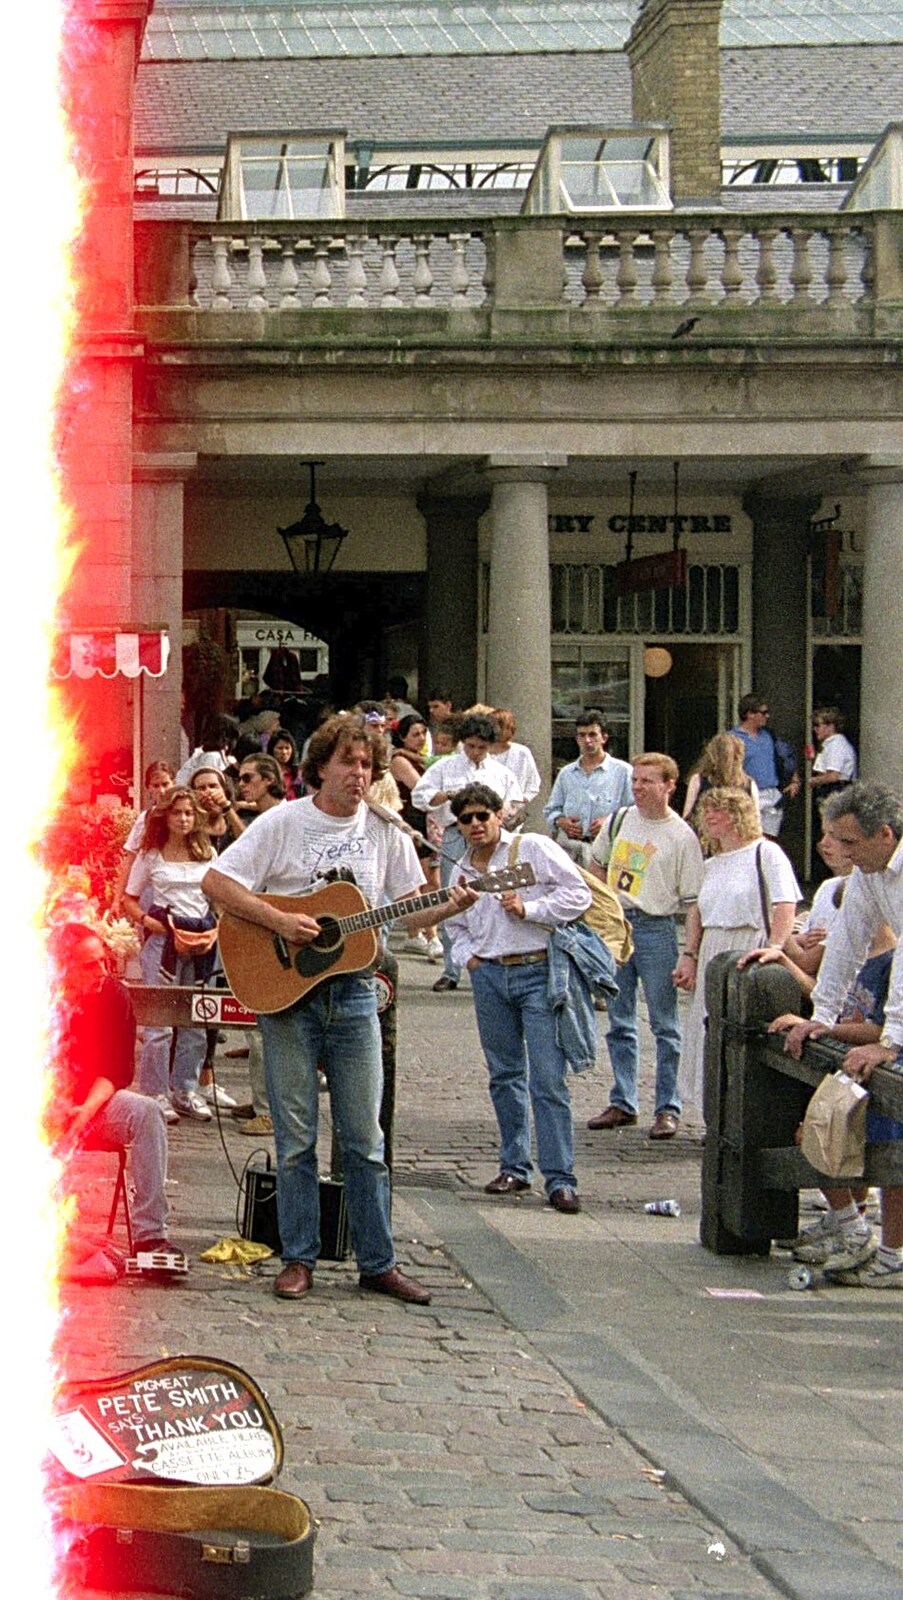 Pete Smith the busker does his thing in Covent Garden from Riki and Dave in Chinatown, and Racing Hovercraft, London and Suffolk - 12th June 1991